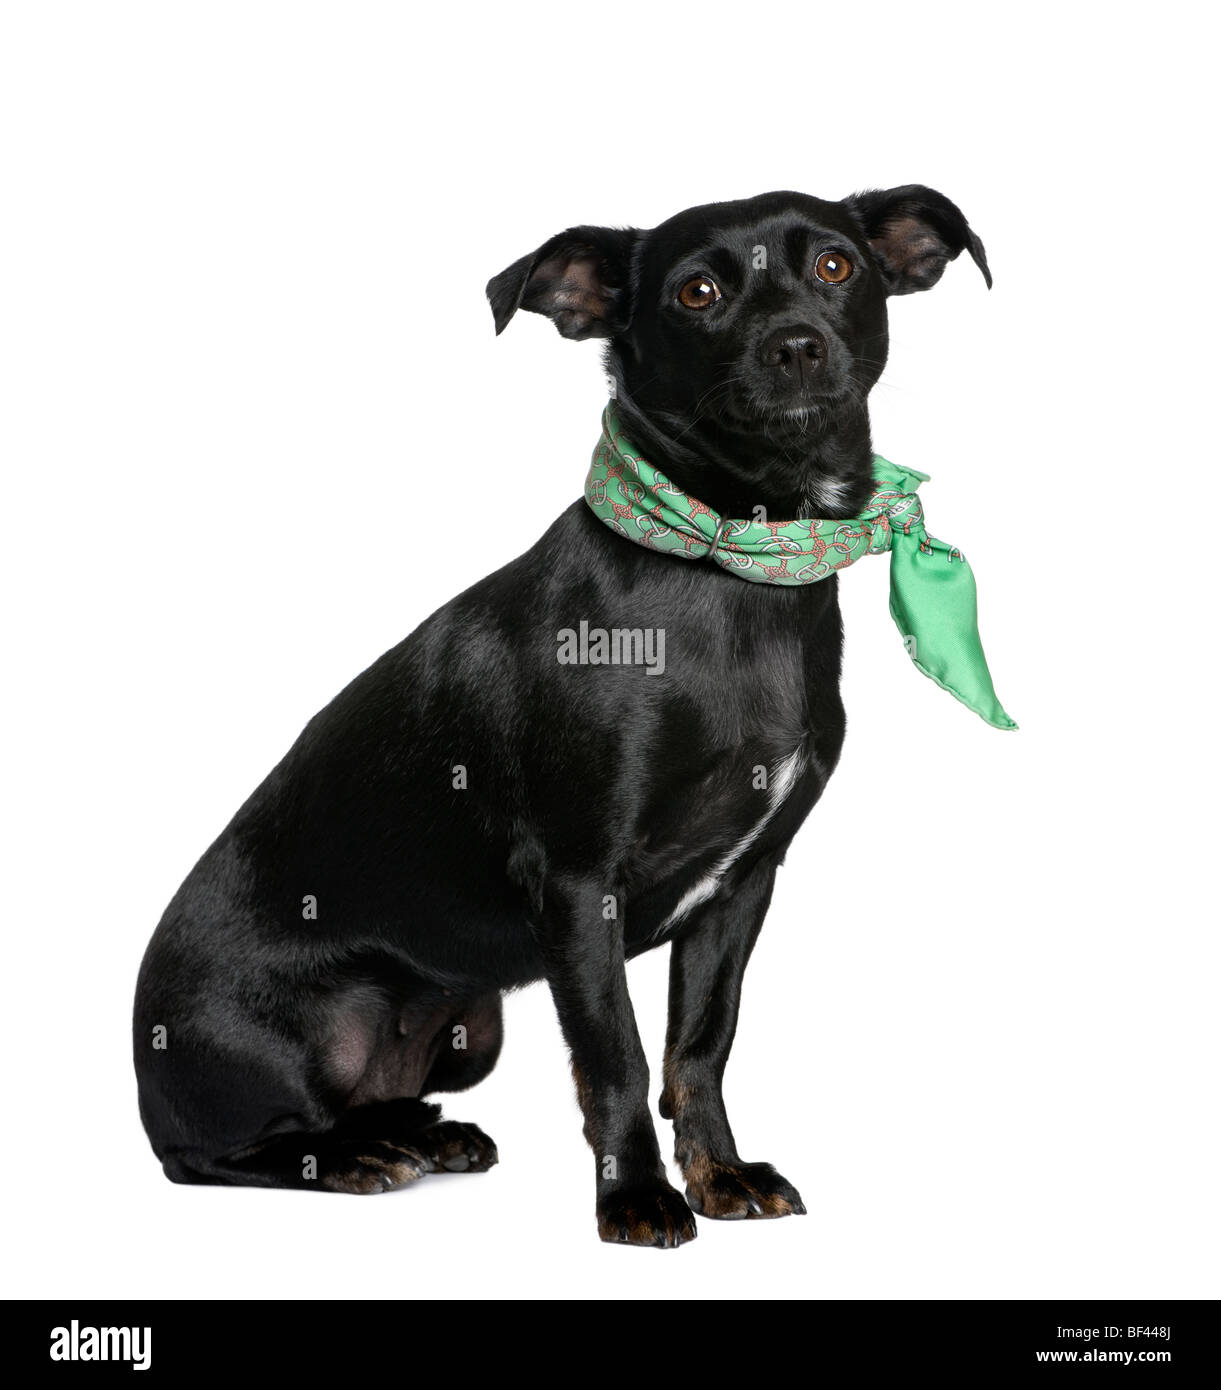 Mixed breed dog between a Chihuahua and a Dachshund, sitting in front of white background Stock Photo